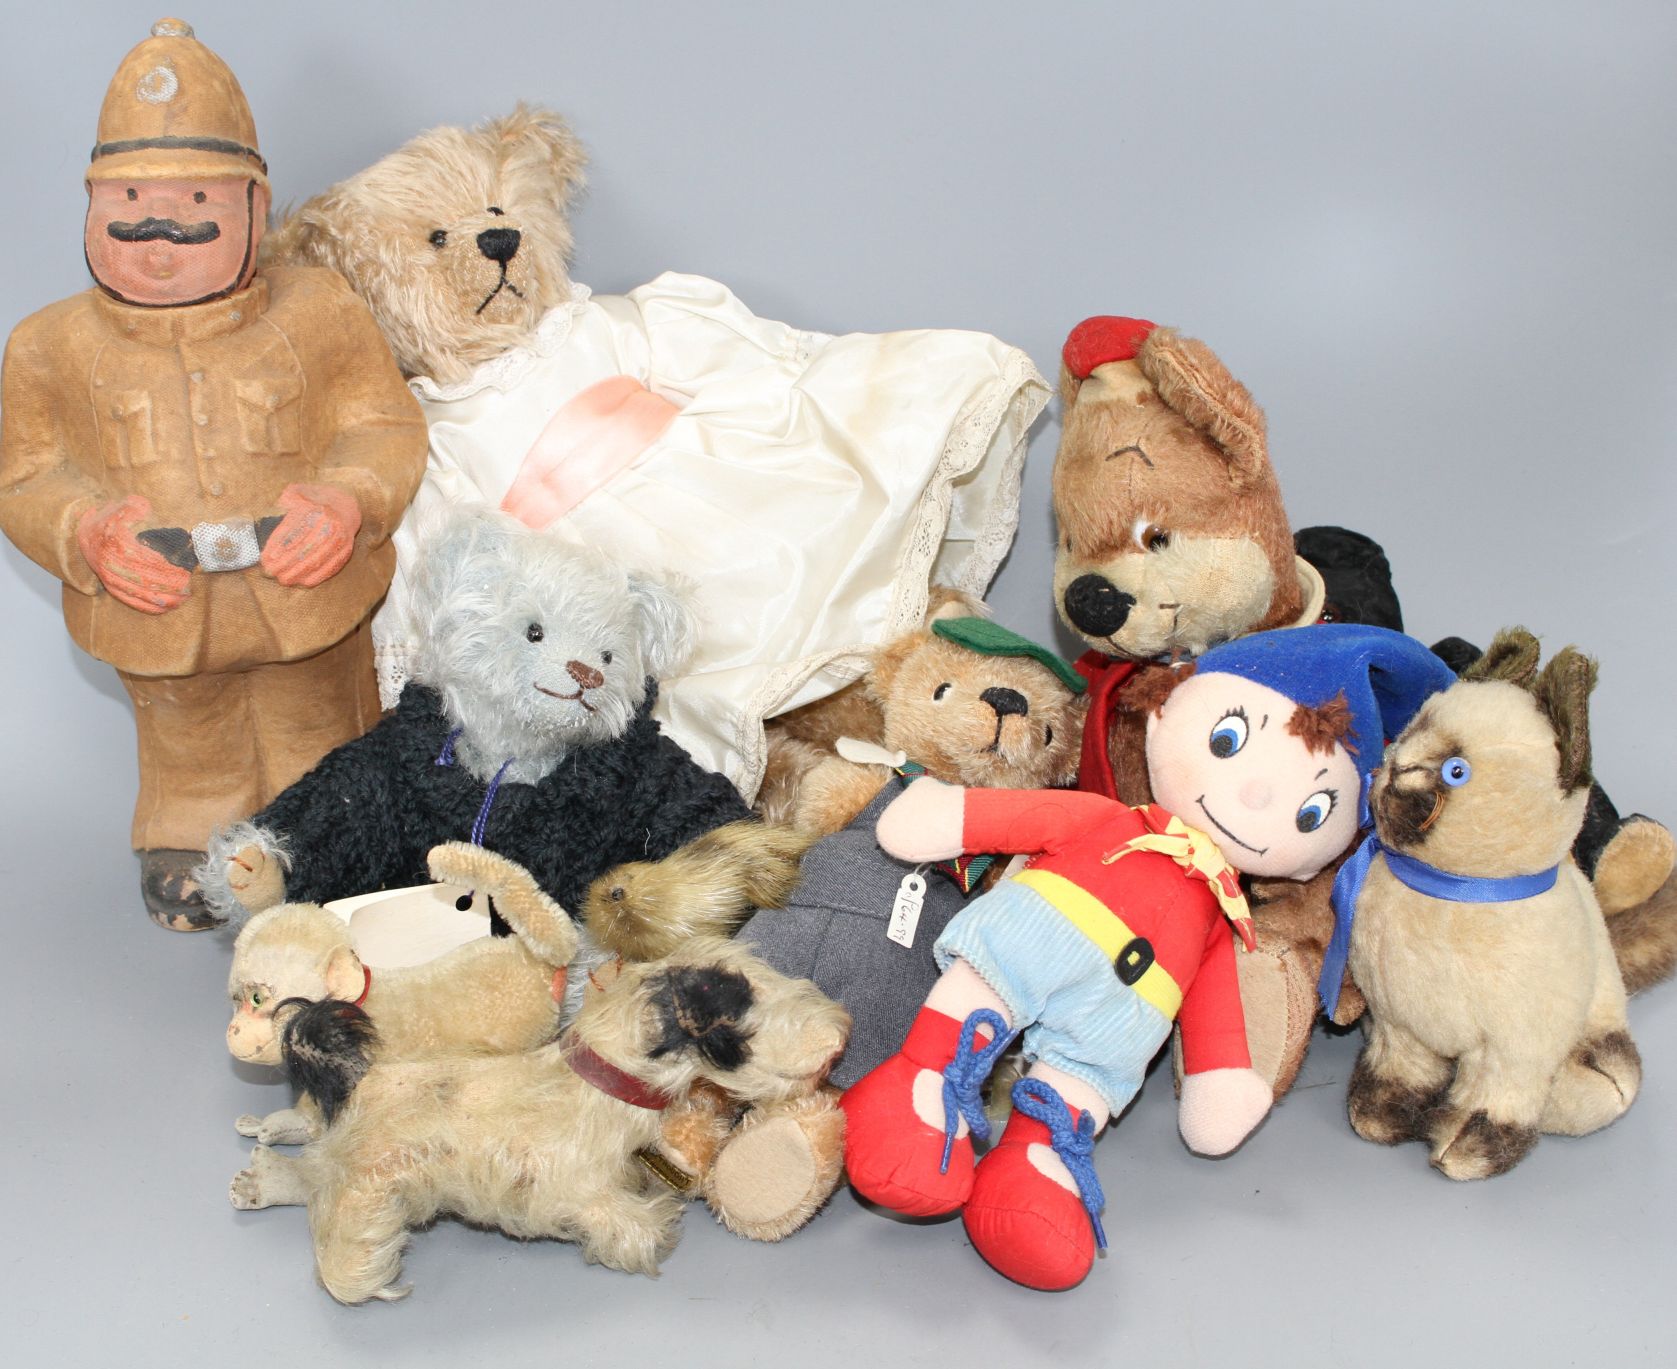 Noddy and Knoll bears, Merrythought Vintage Siamese cat, a Steiff monkey and Carobard character